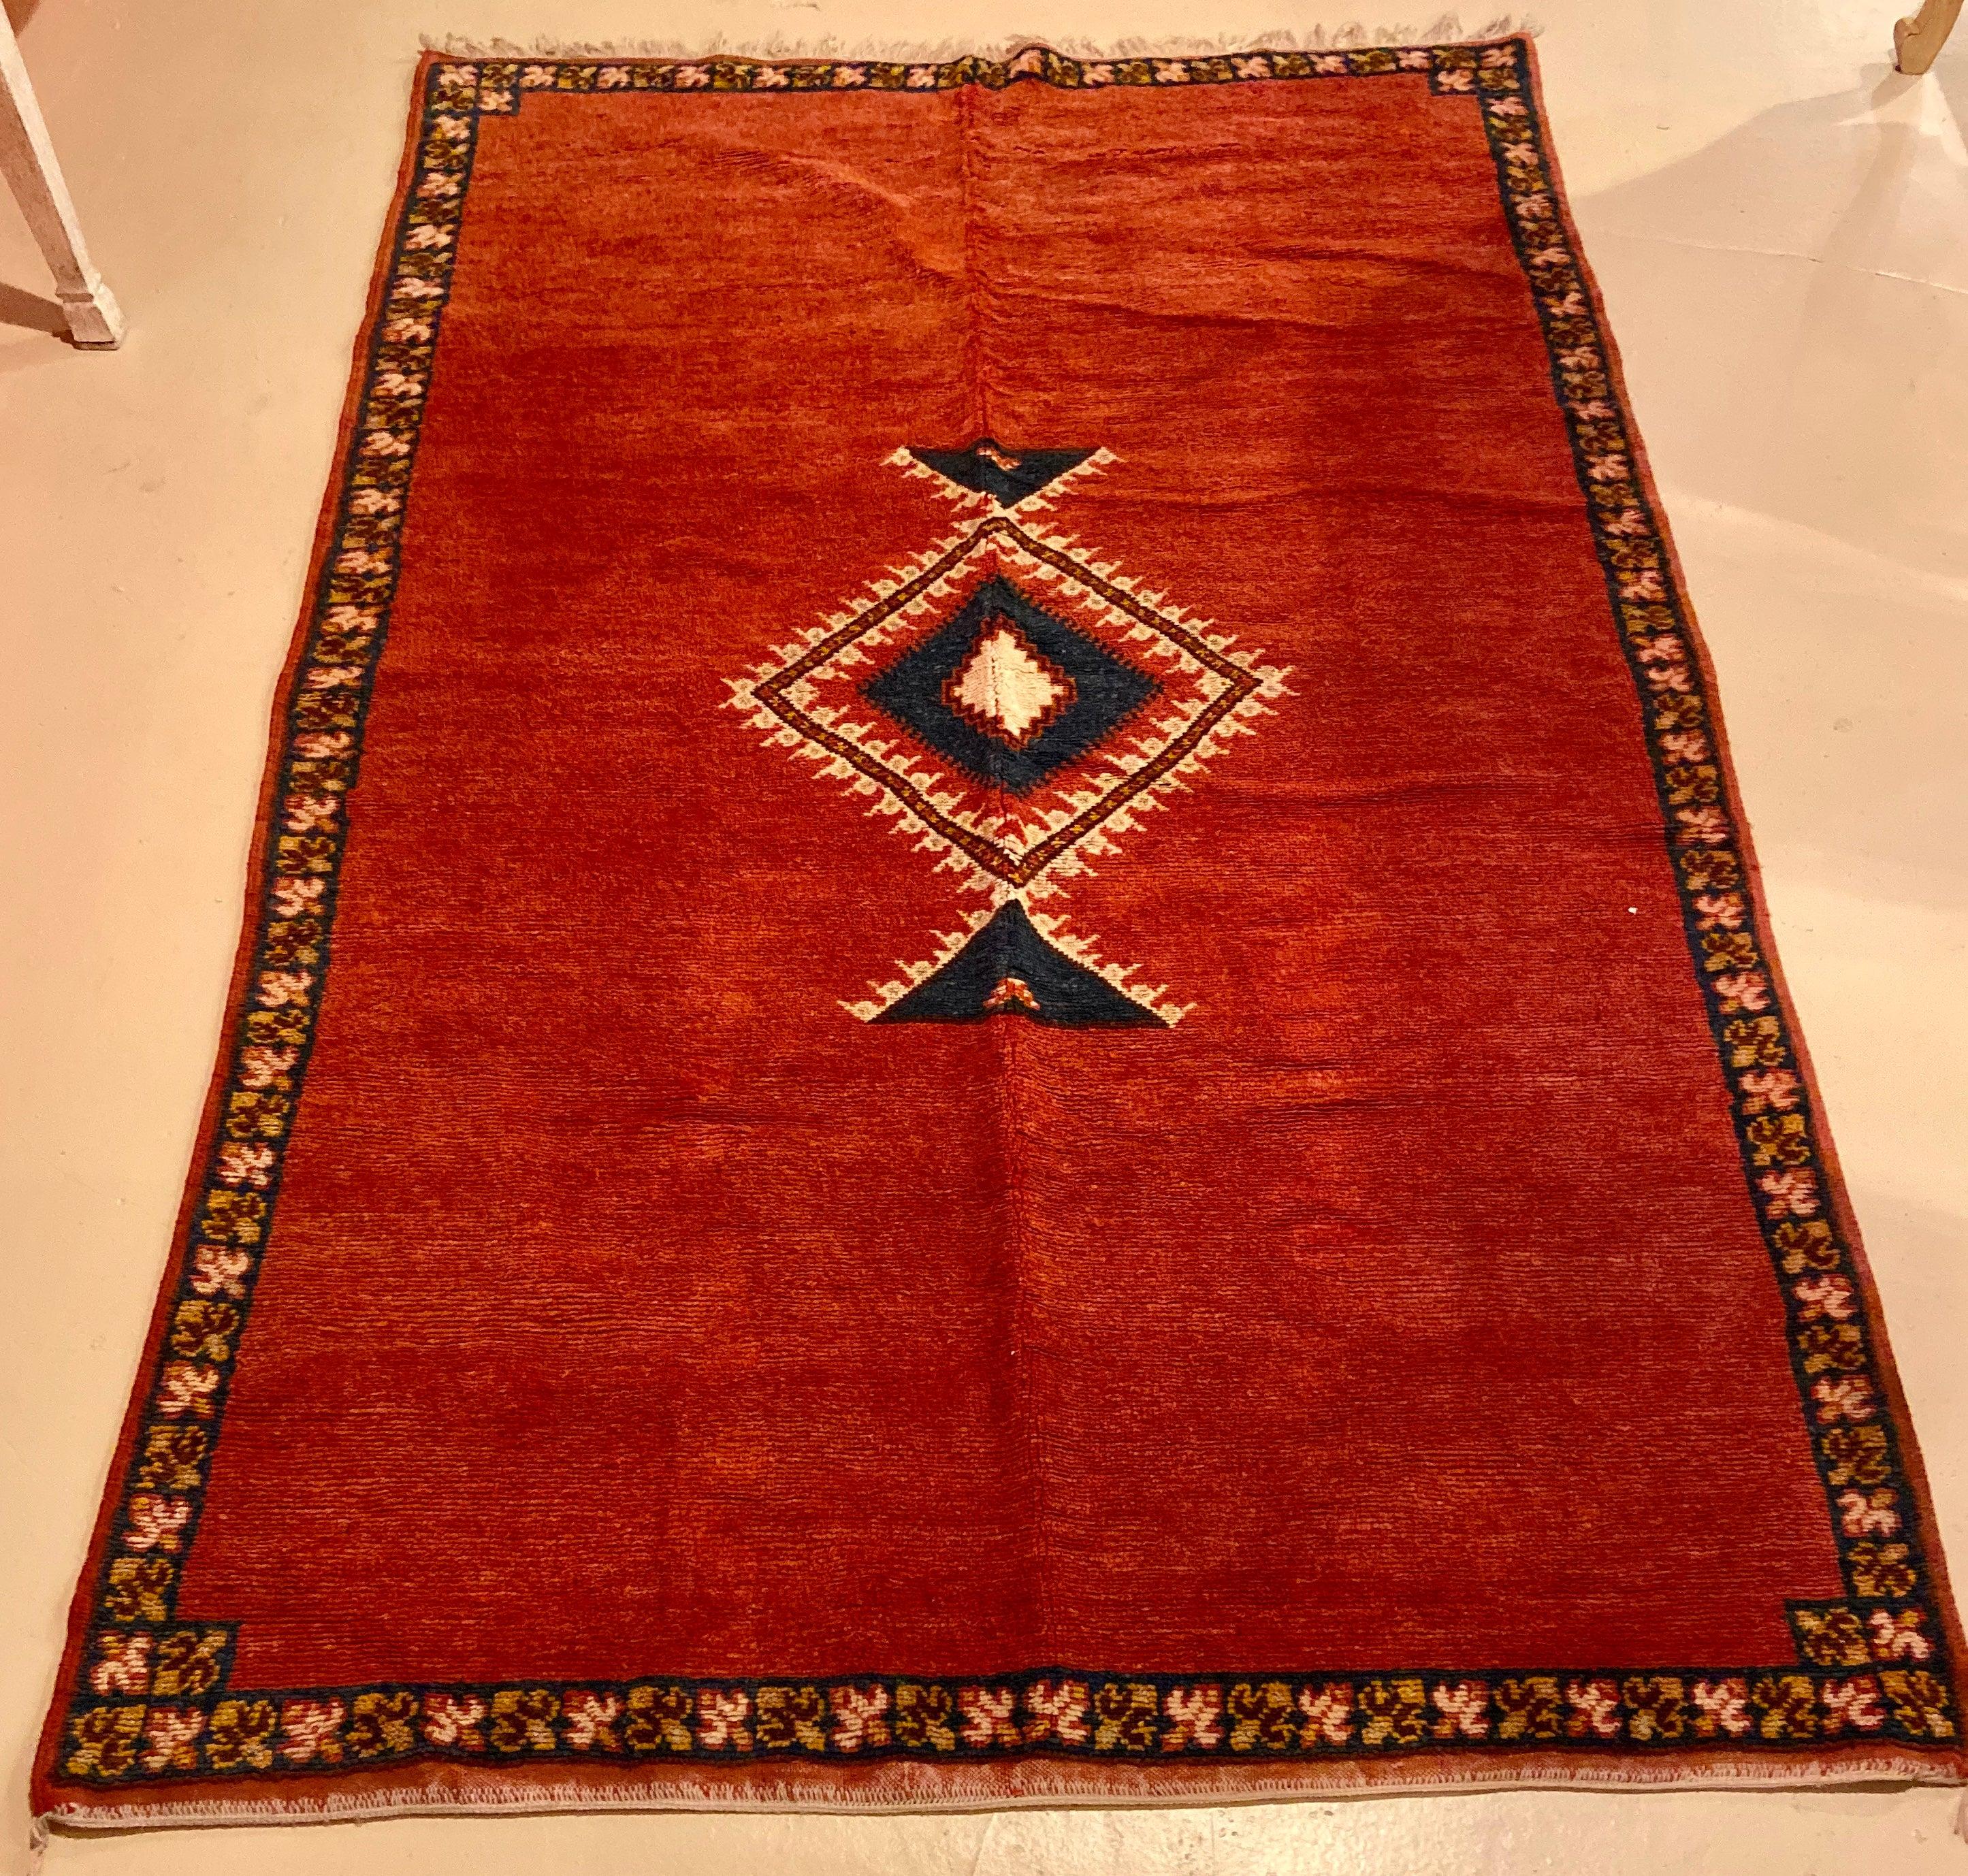 Moorish Moroccan Tribal Handwoven Rug or Carpet Wool with Blue Diamond on Red Background